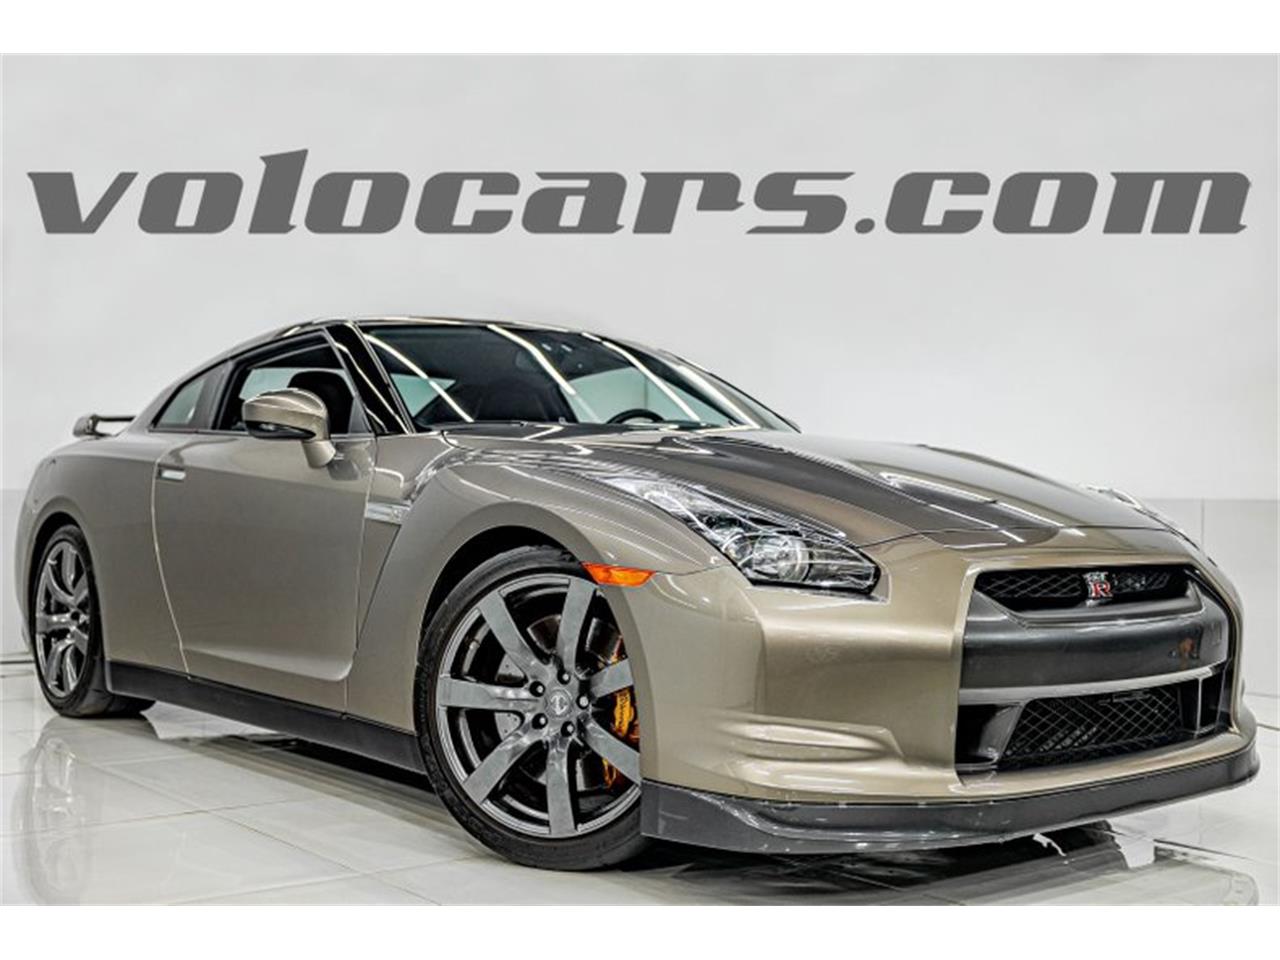 For Sale: 2009 Nissan GT-R in Volo, Illinois for sale in Ingleside, IL